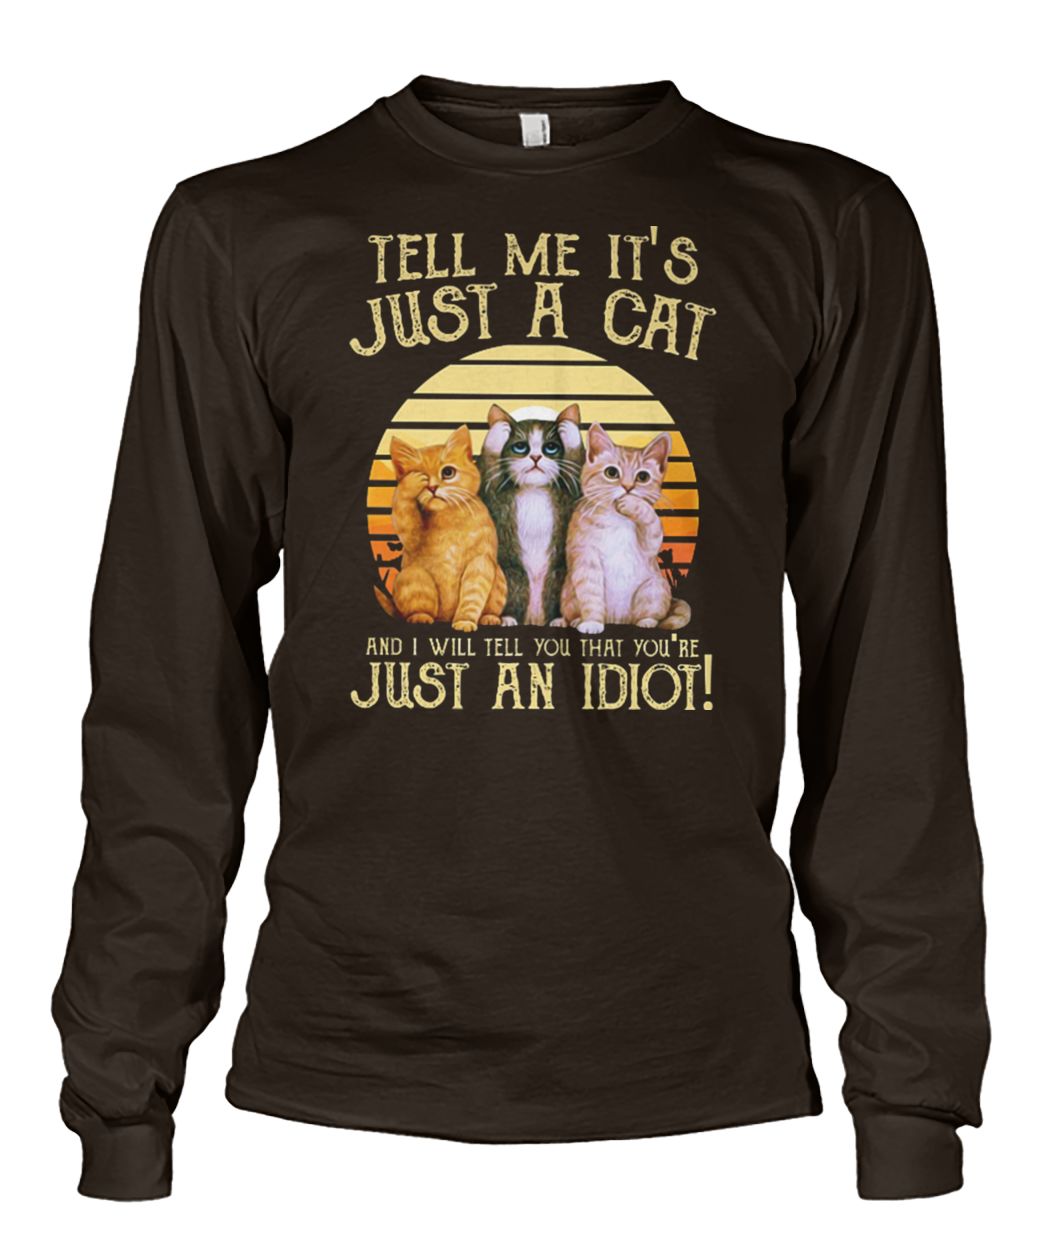 Vintage tell me it's just a cat and I will tell you that you're just an idiot unisex long sleeve